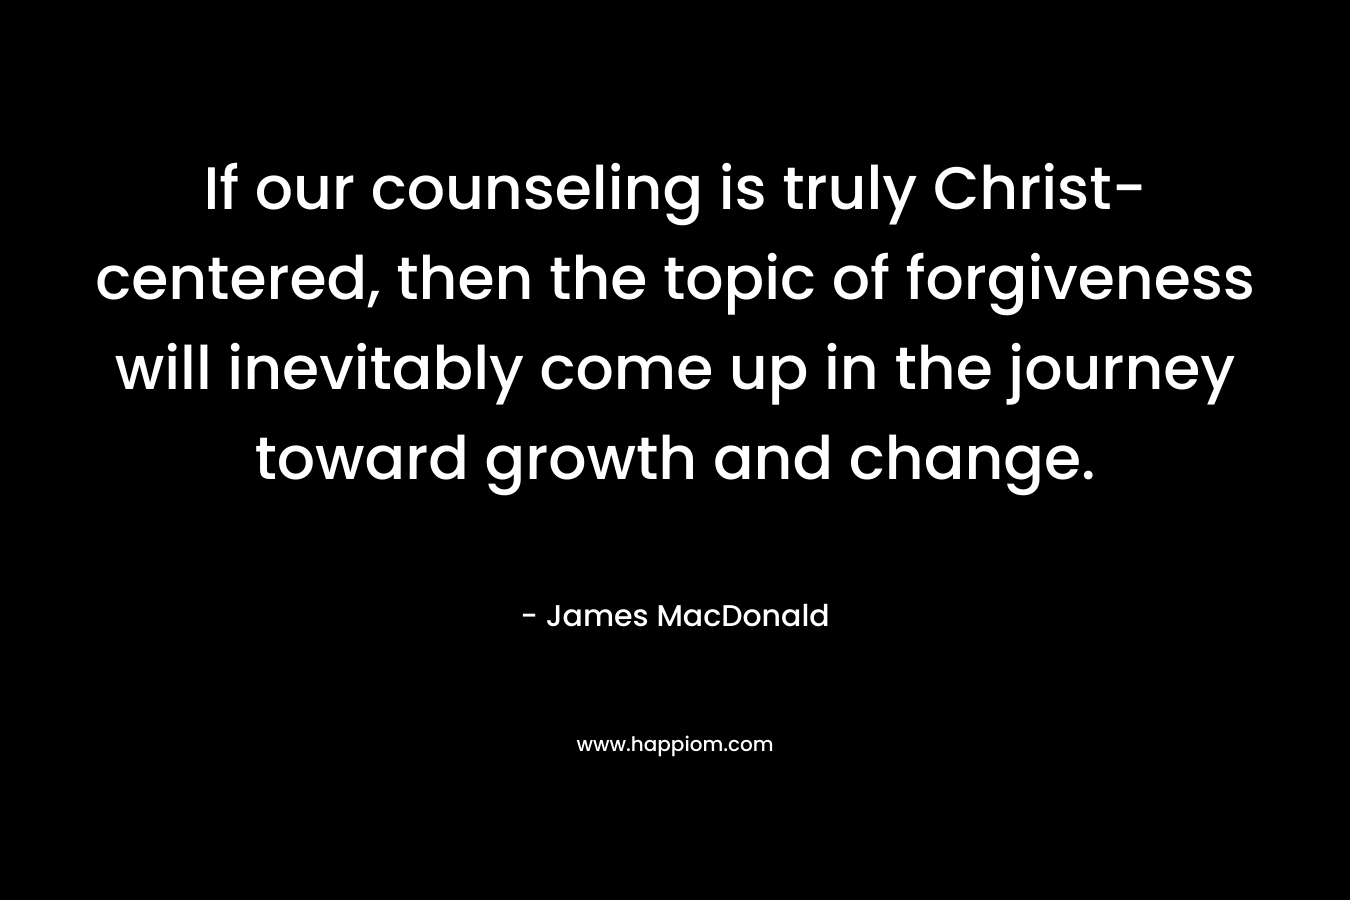 If our counseling is truly Christ-centered, then the topic of forgiveness will inevitably come up in the journey toward growth and change. – James MacDonald